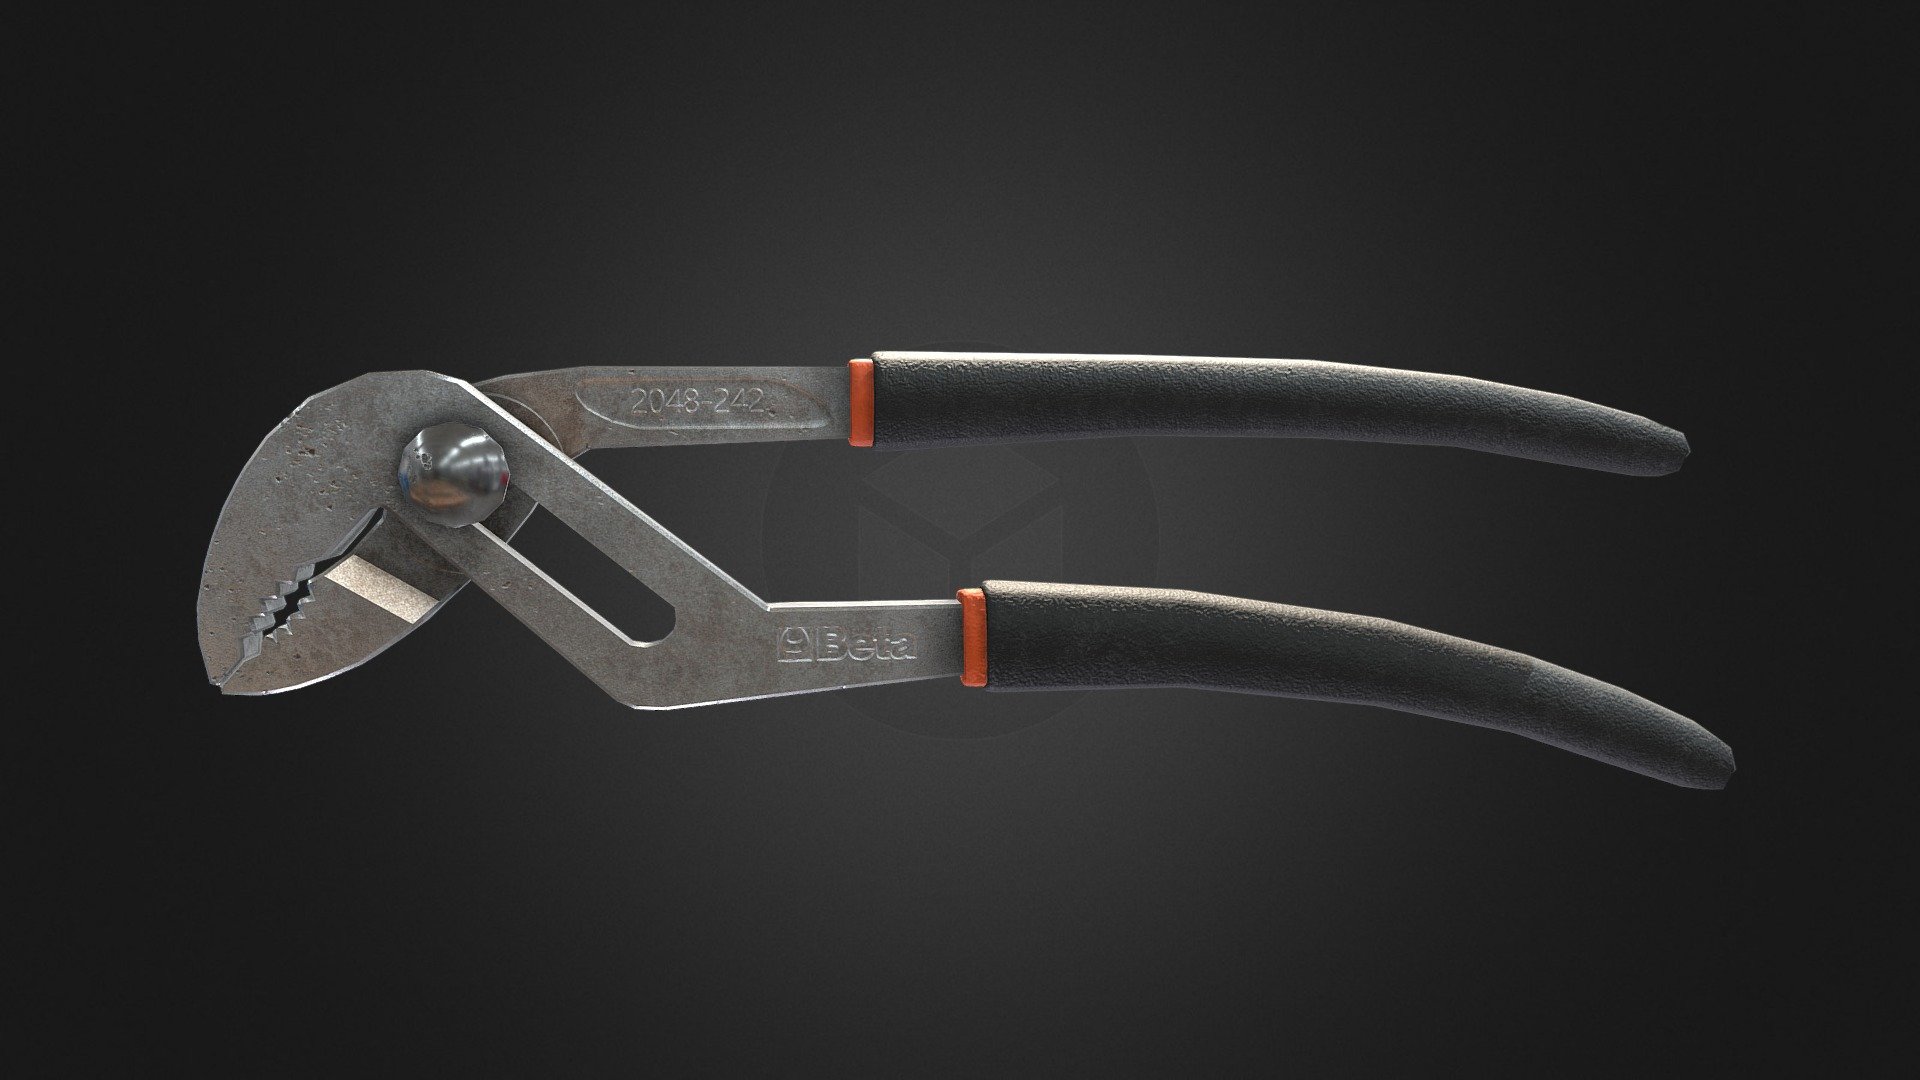 Realistic Tongue-and-Groove Pliers